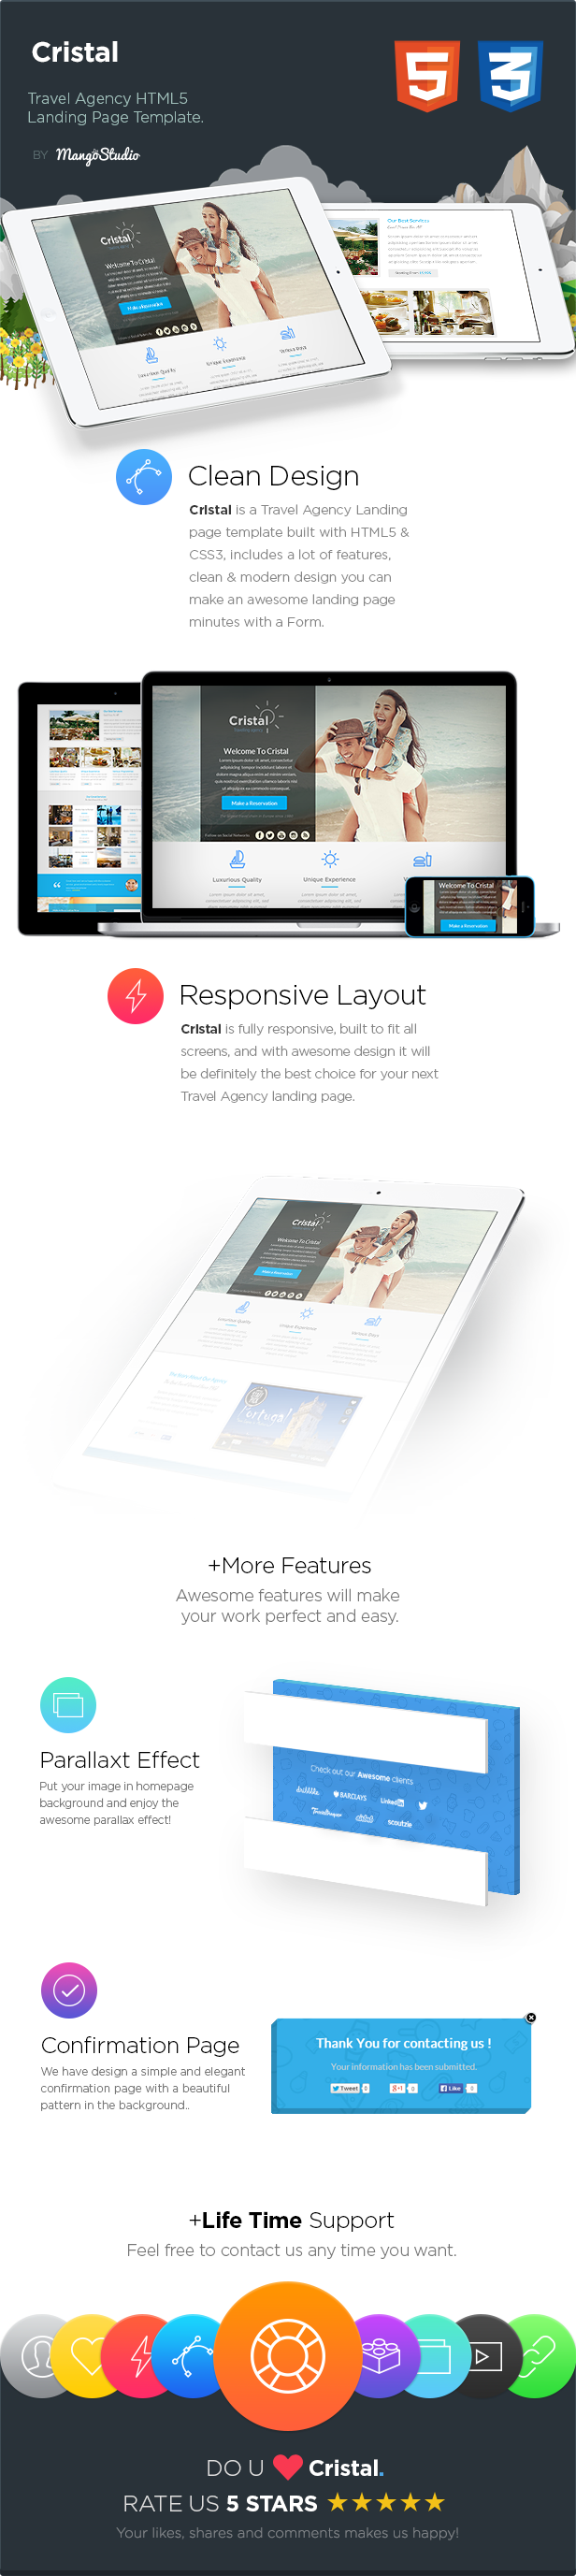 Cristal - Travel Agency HTML Landing Page Template - 2